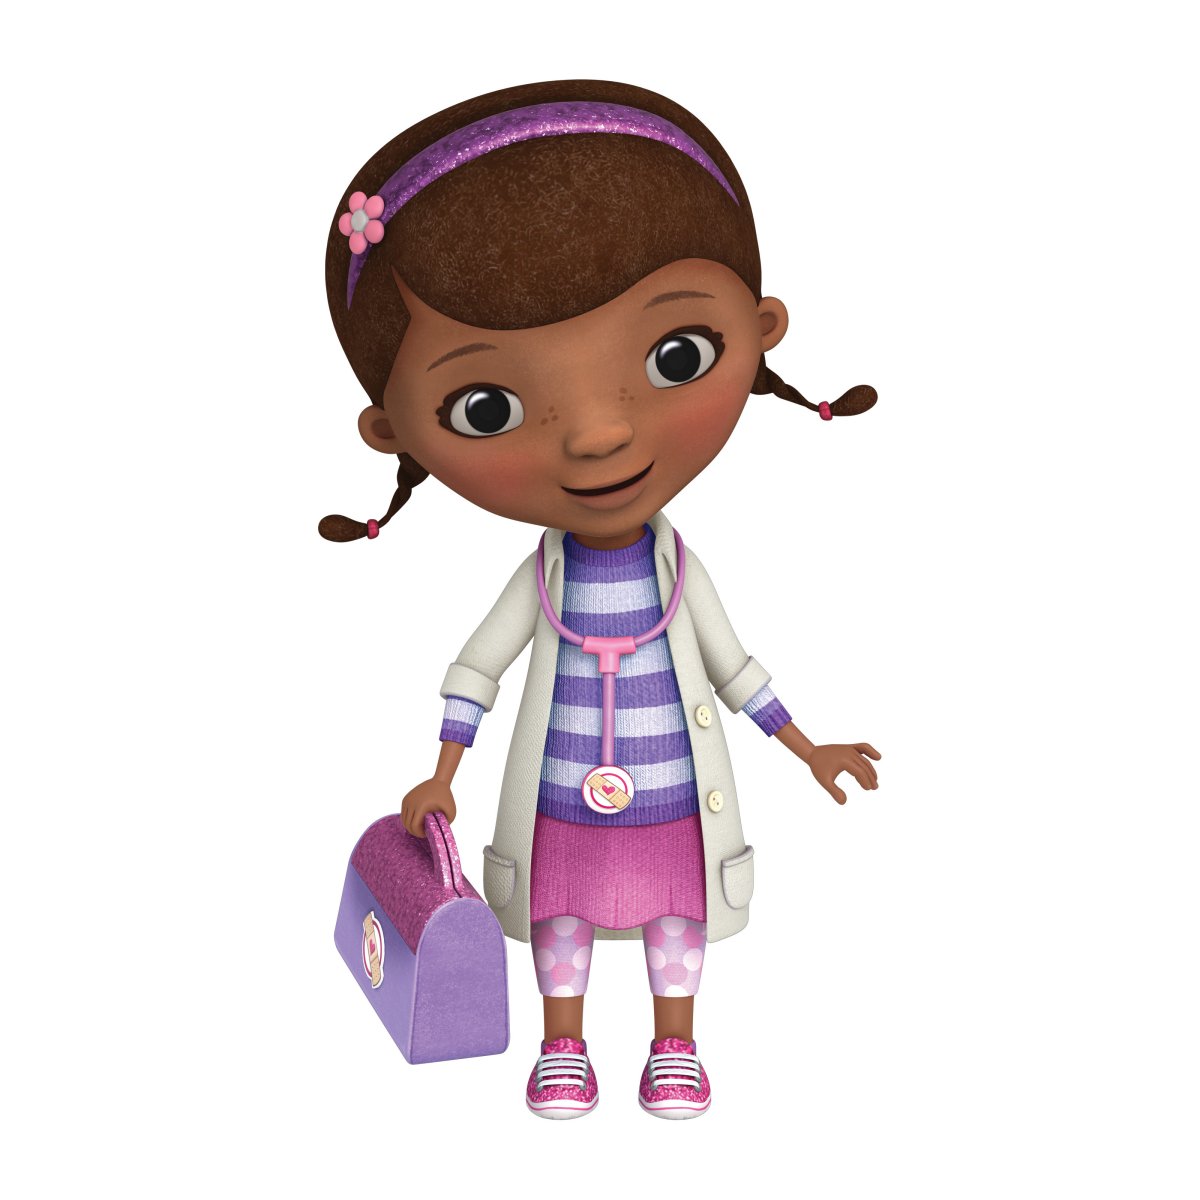 Doc McStuffins Possibly Coming to Hollywood Studios